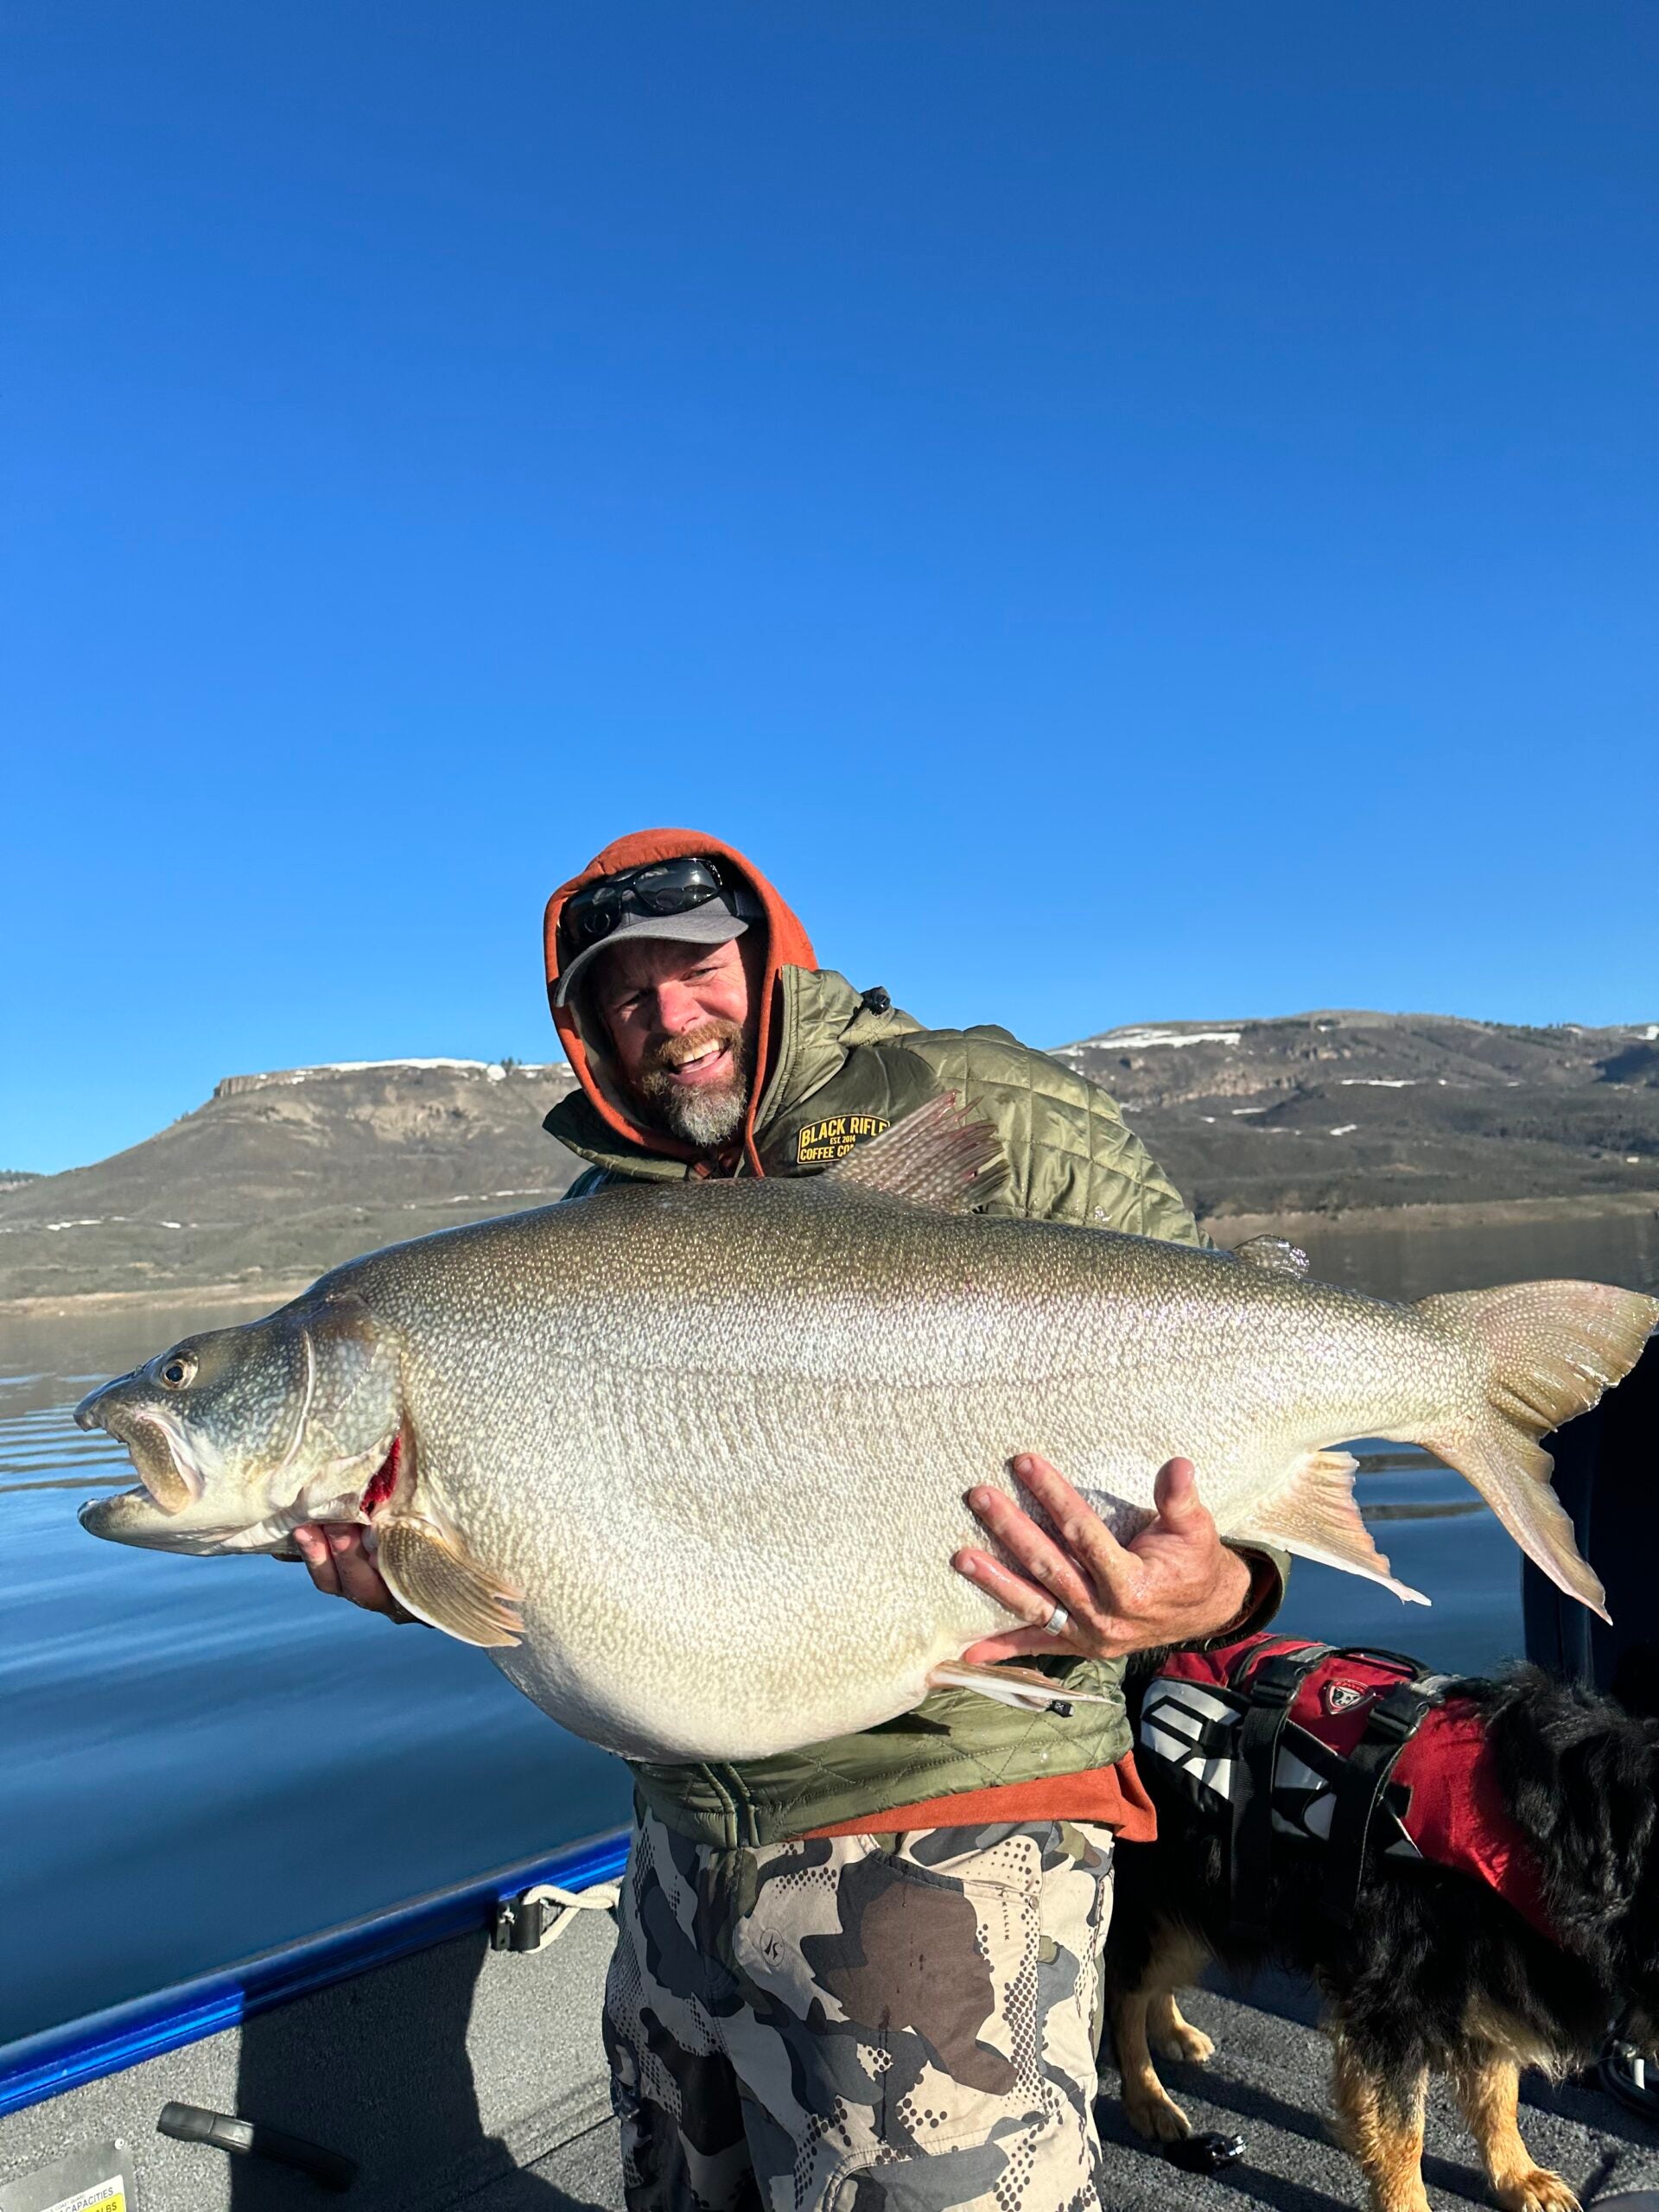 Angler Catches Likely World Record Lake Trout | tacticalusa.net